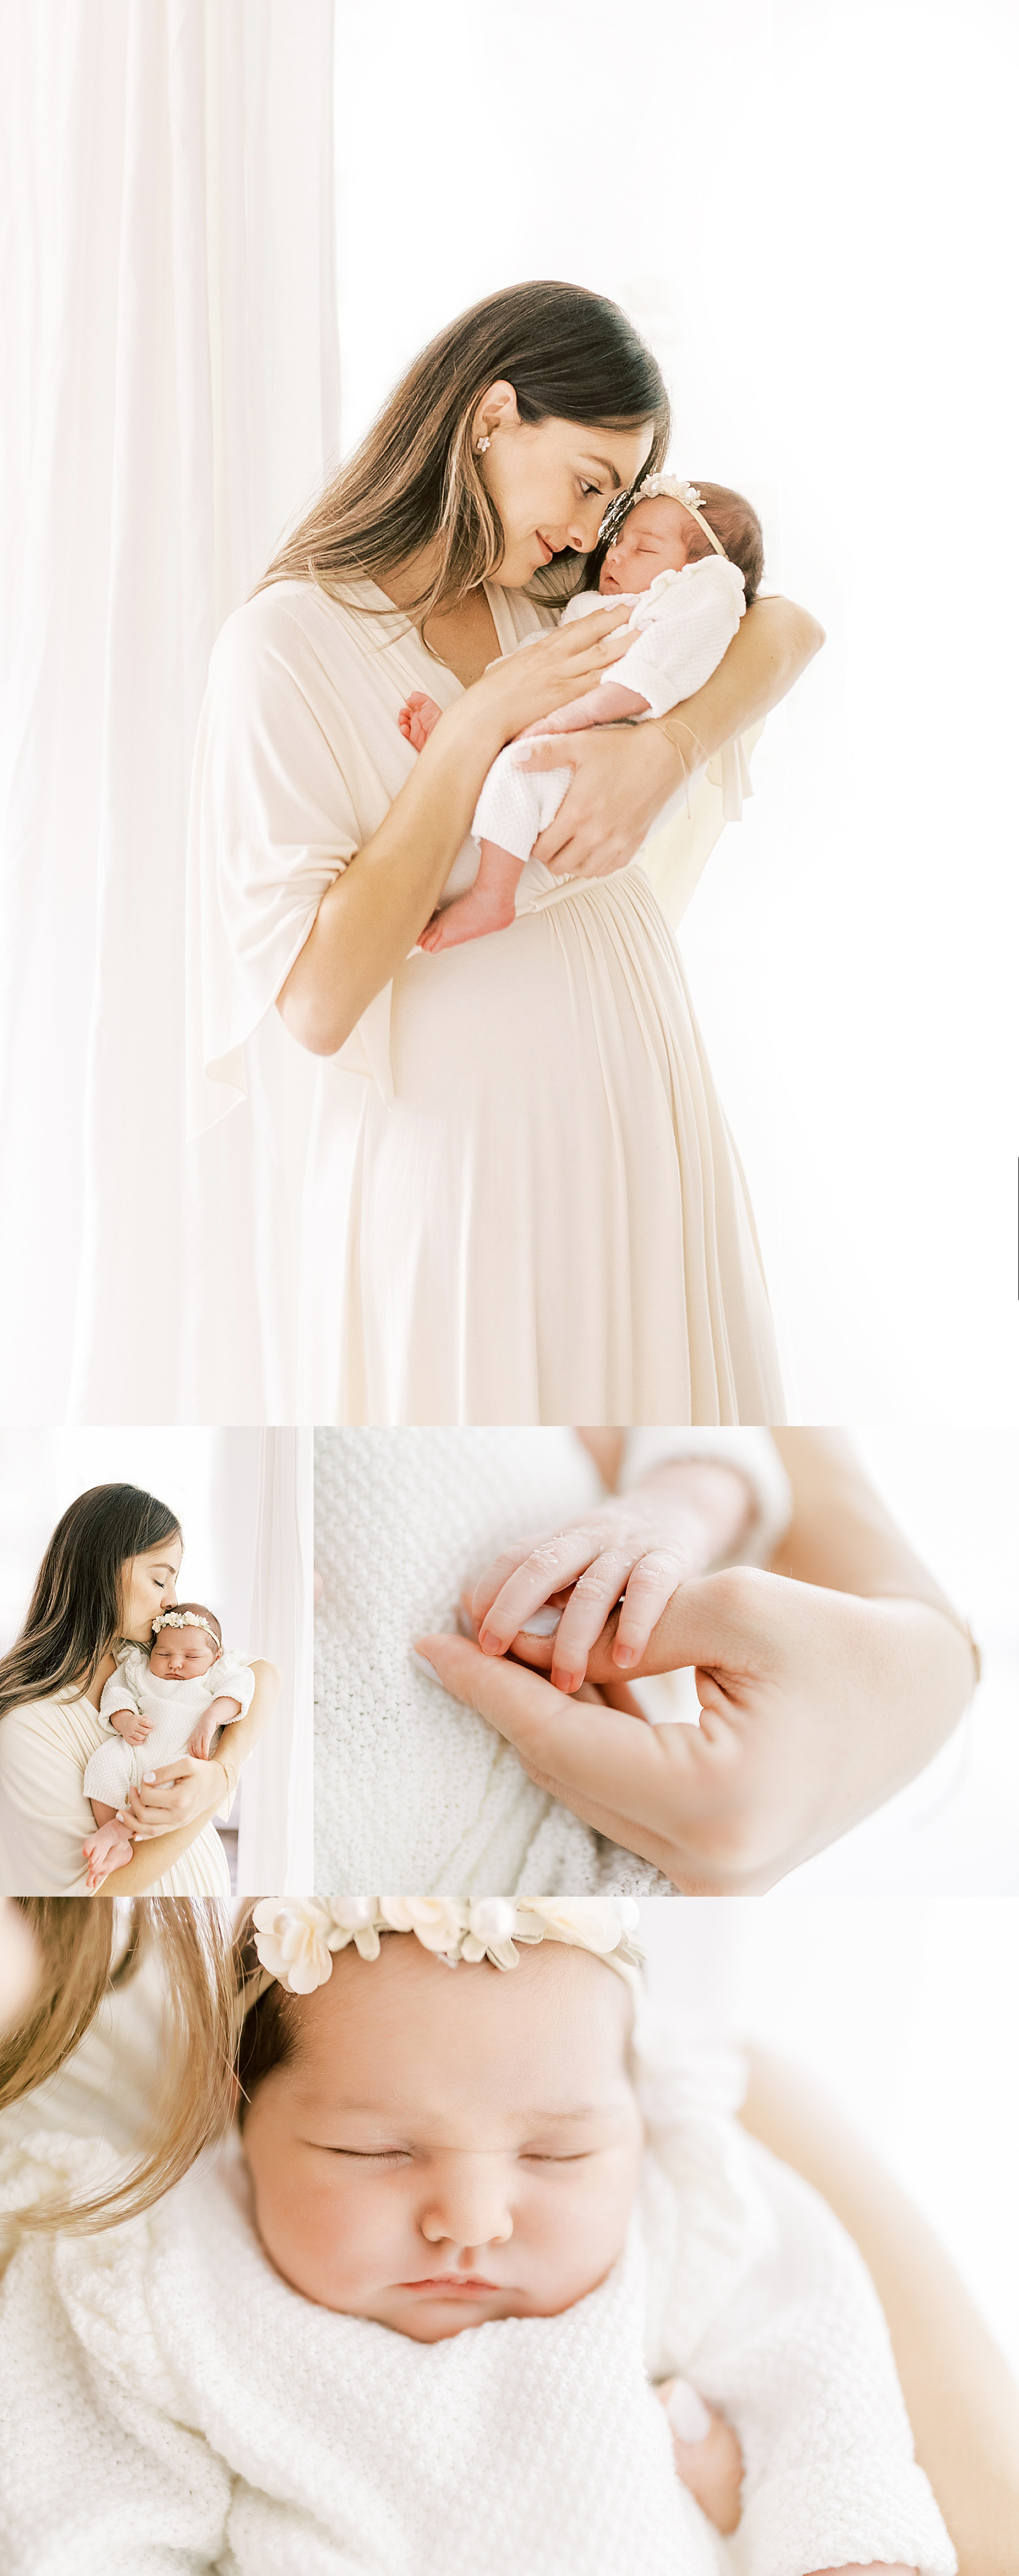  collage of images with woman in cream dress holding newborn baby against white sheer curtains on window